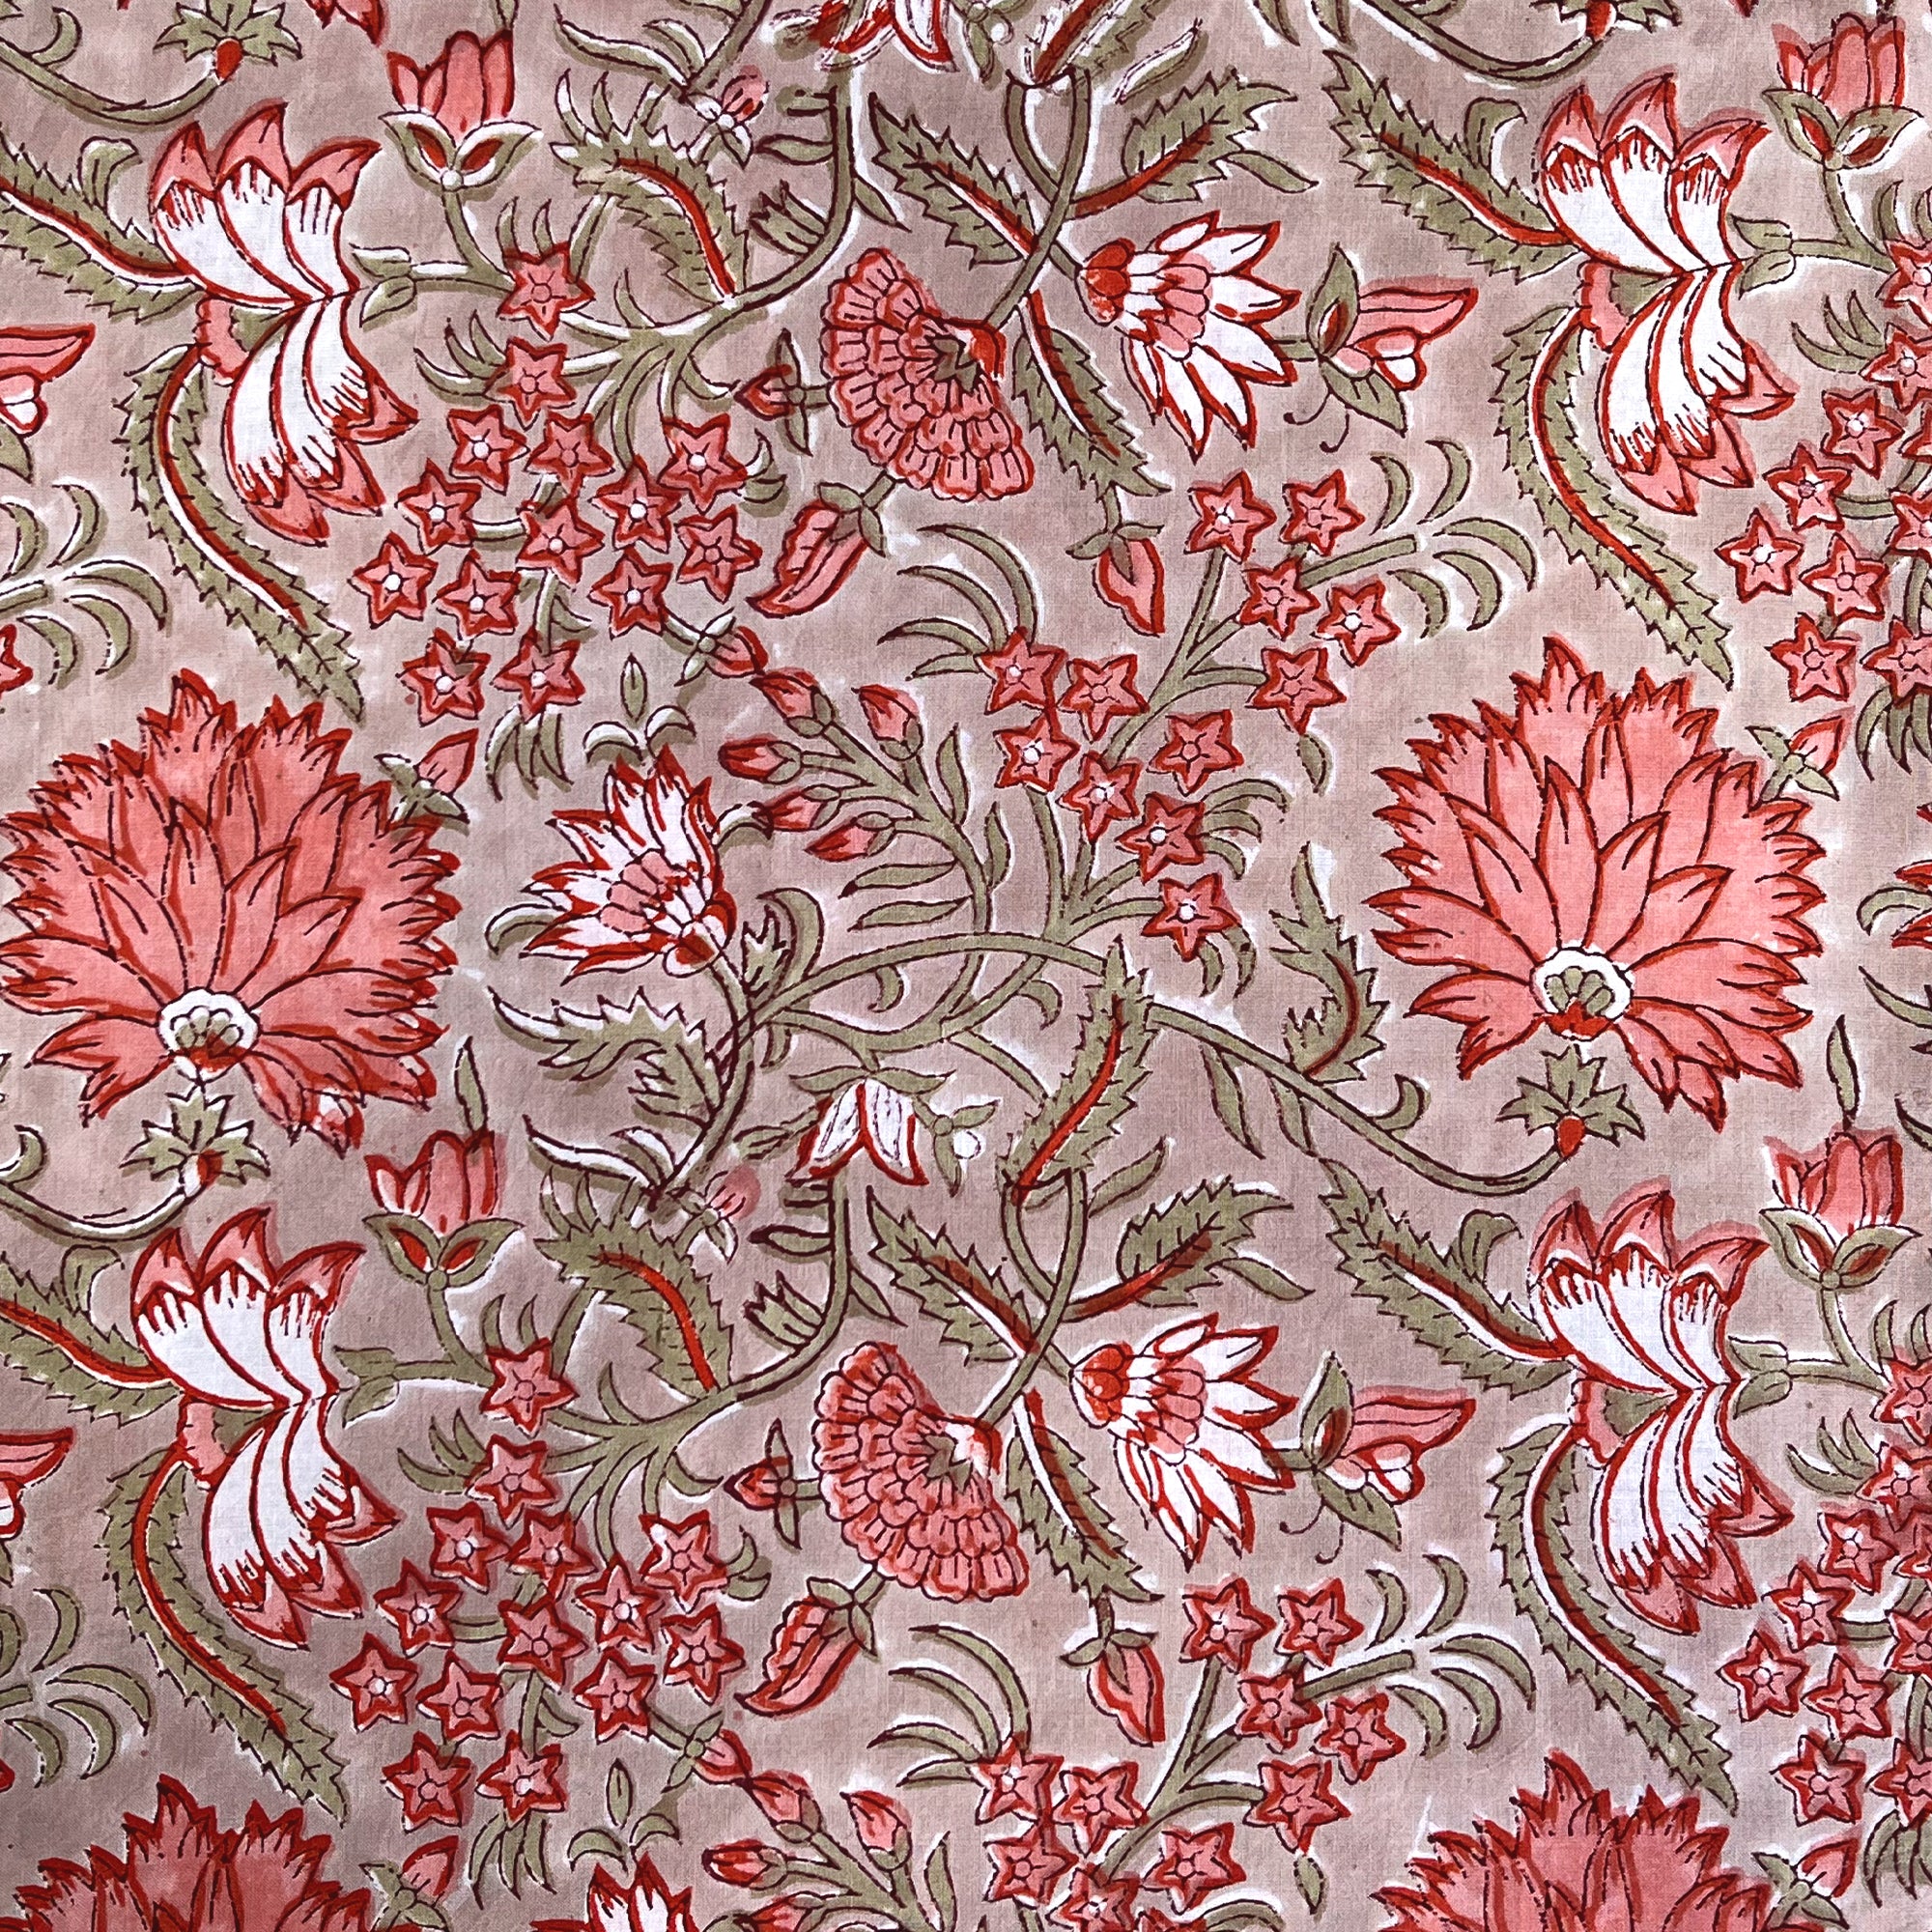 Peach Floral Jaal Rapid Hand Block Printed Cotton Fabric